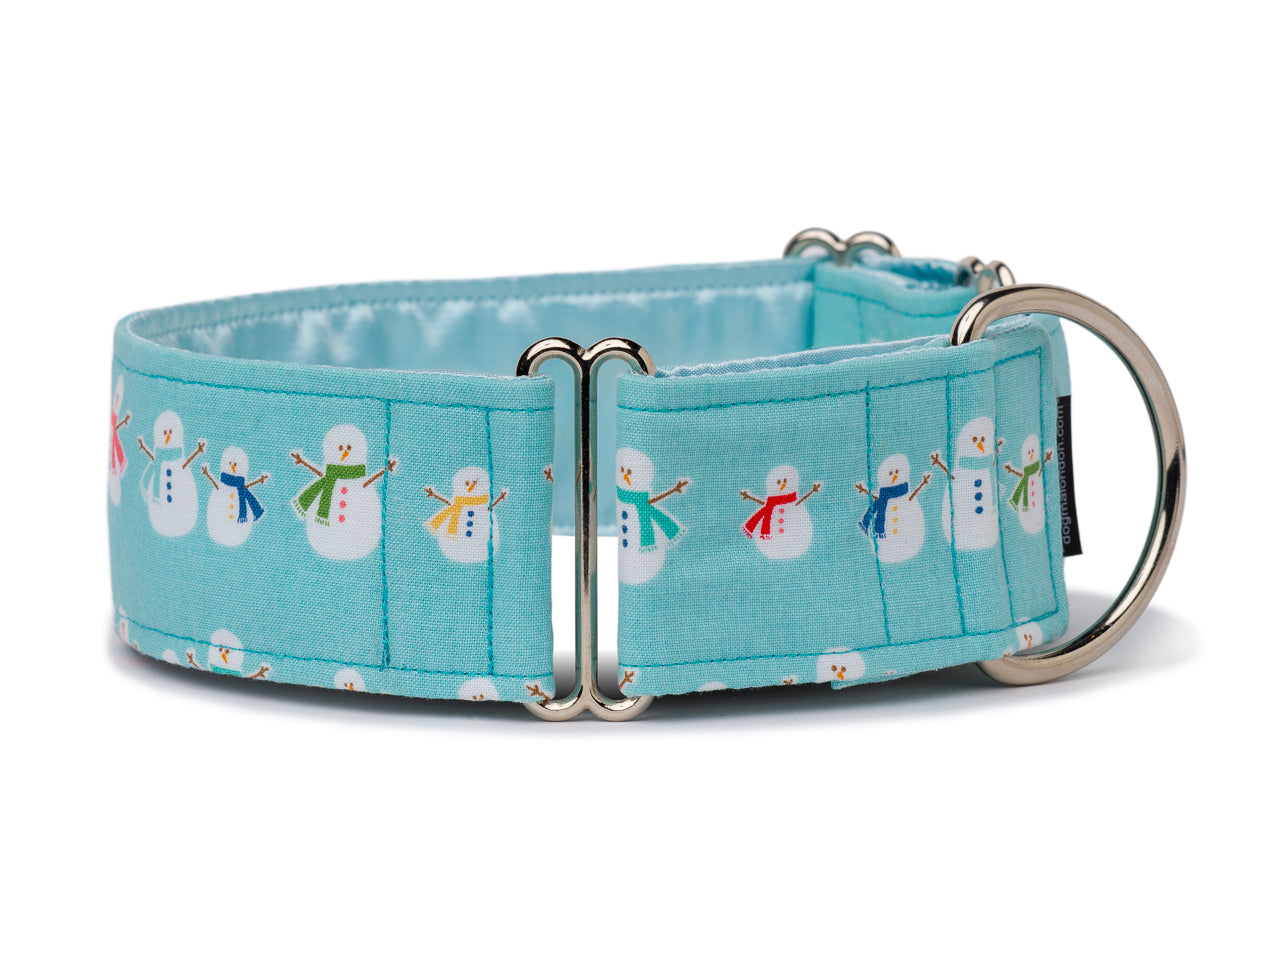 If your pooch likes to play in the snow, the festive snowmen on this chilly blue collar are the perfect playmates!